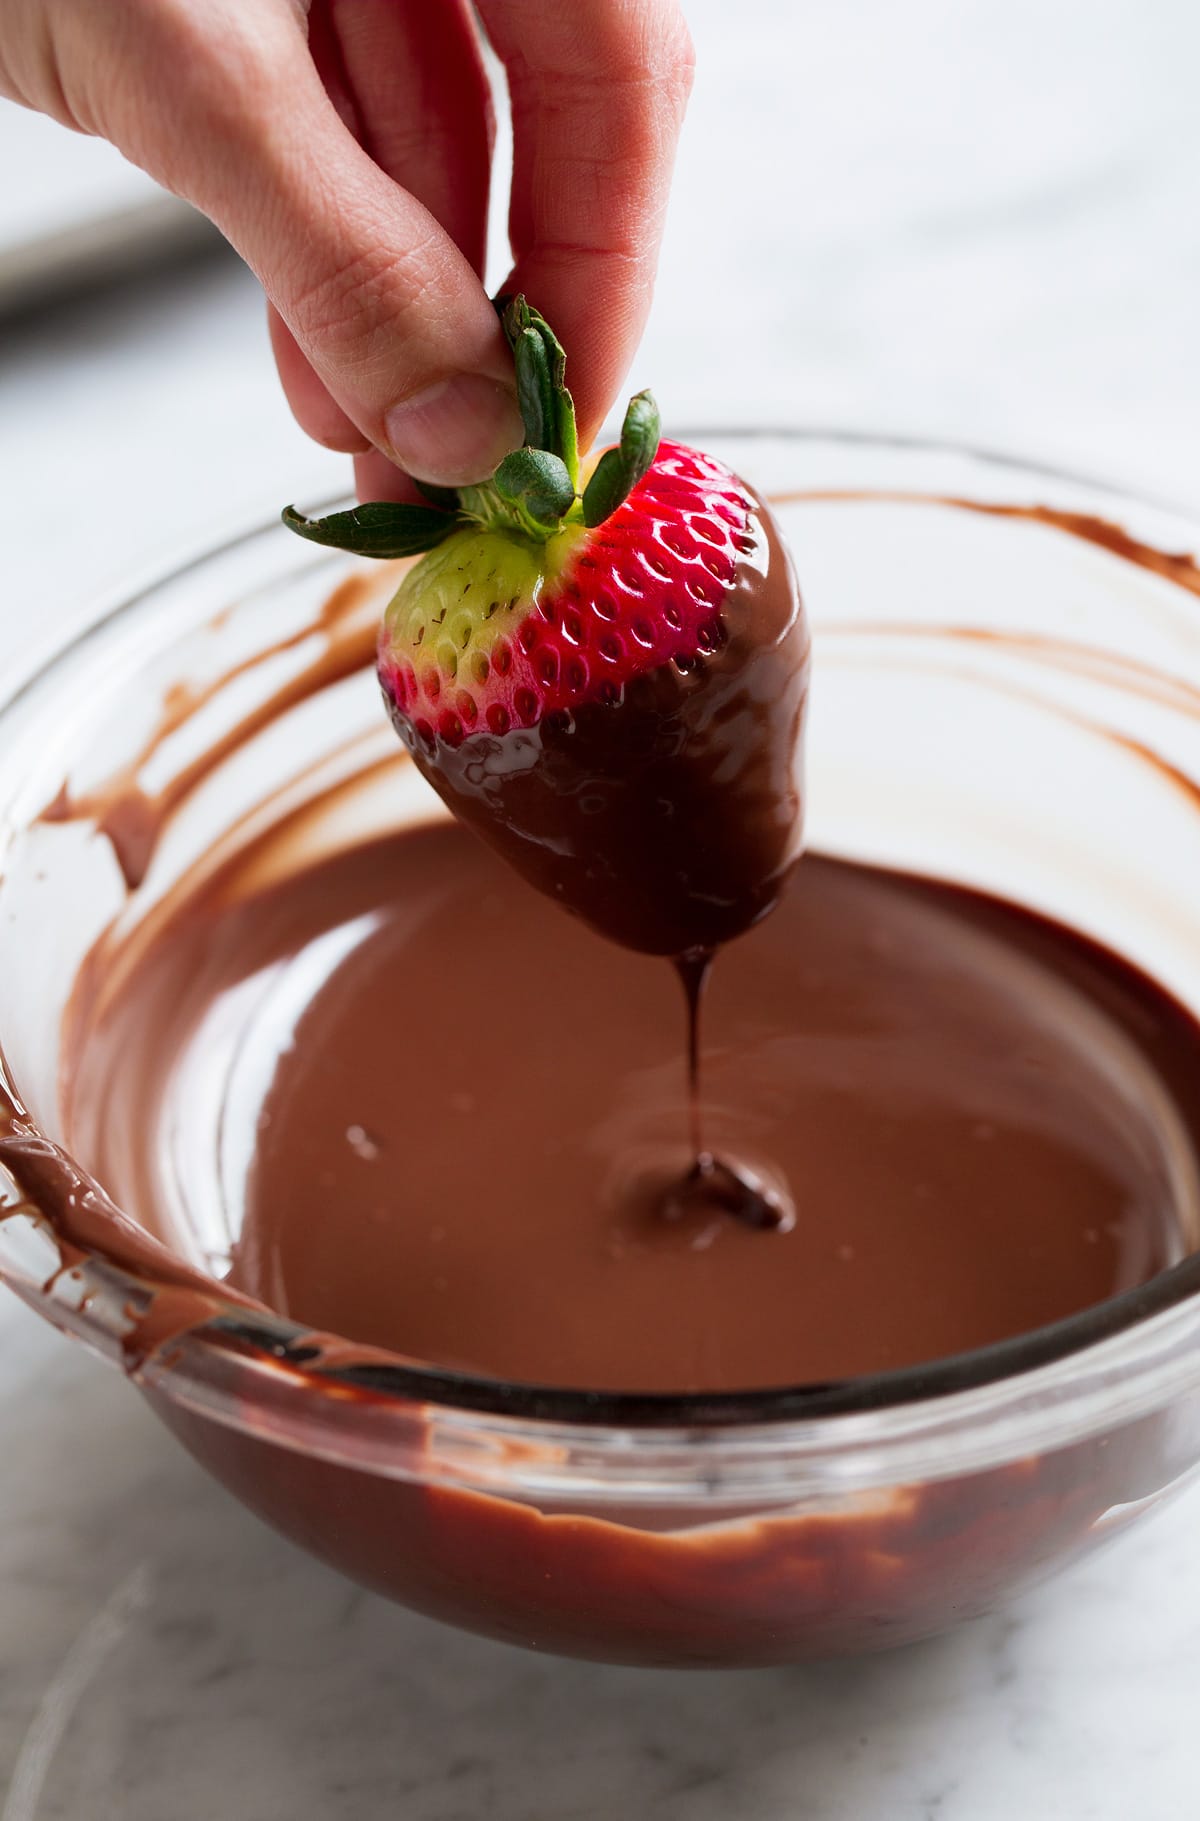 Hand holding strawberry by leaves and dipping strawberry in melted chocolate.